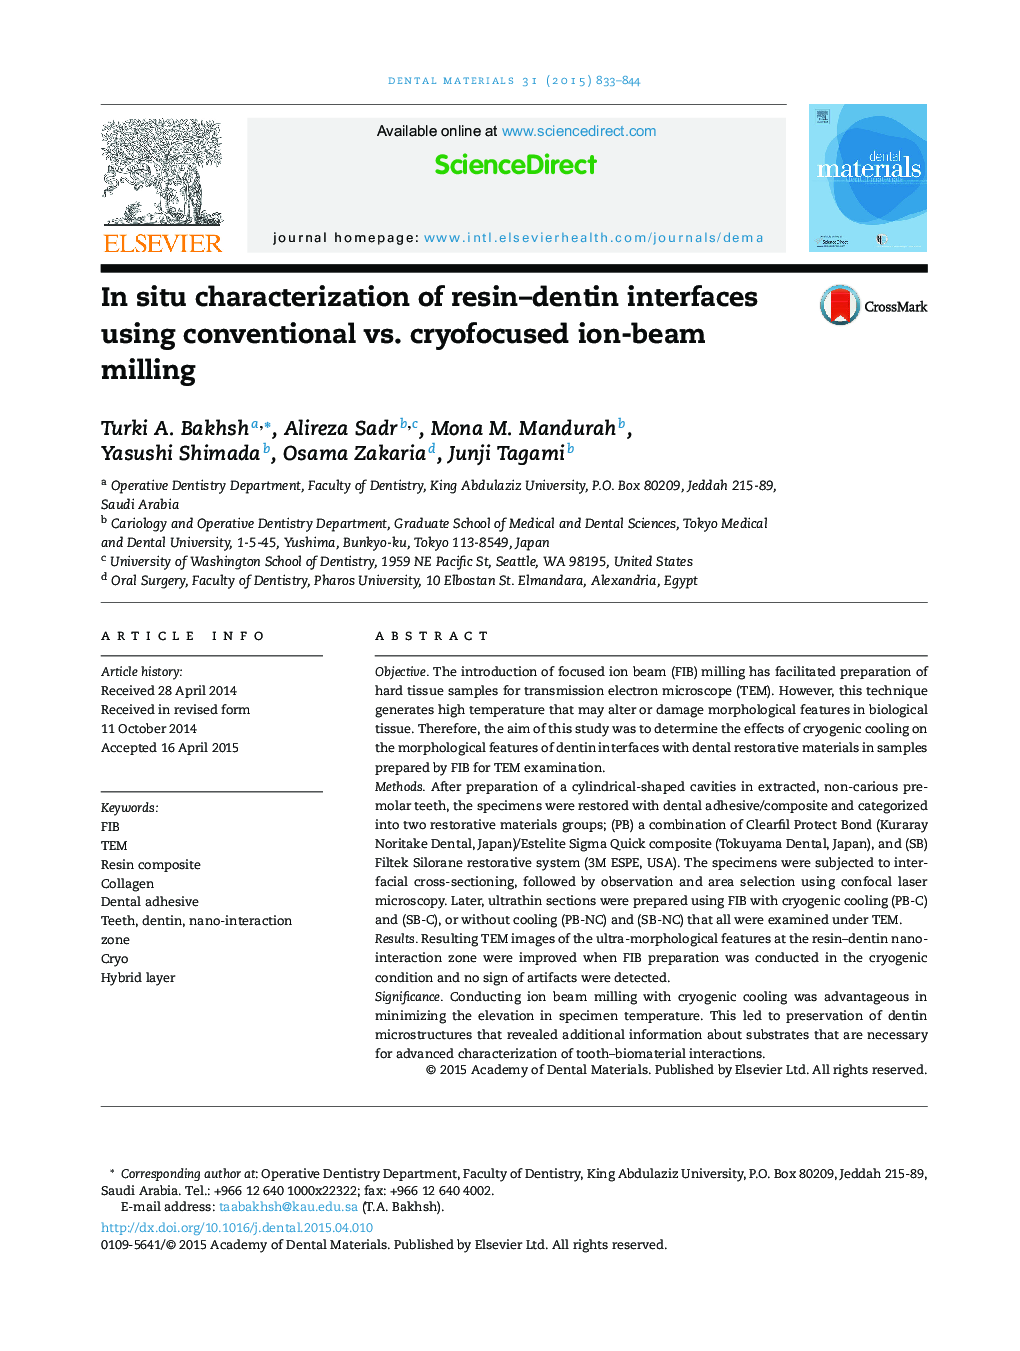 In situ characterization of resin–dentin interfaces using conventional vs. cryofocused ion-beam milling